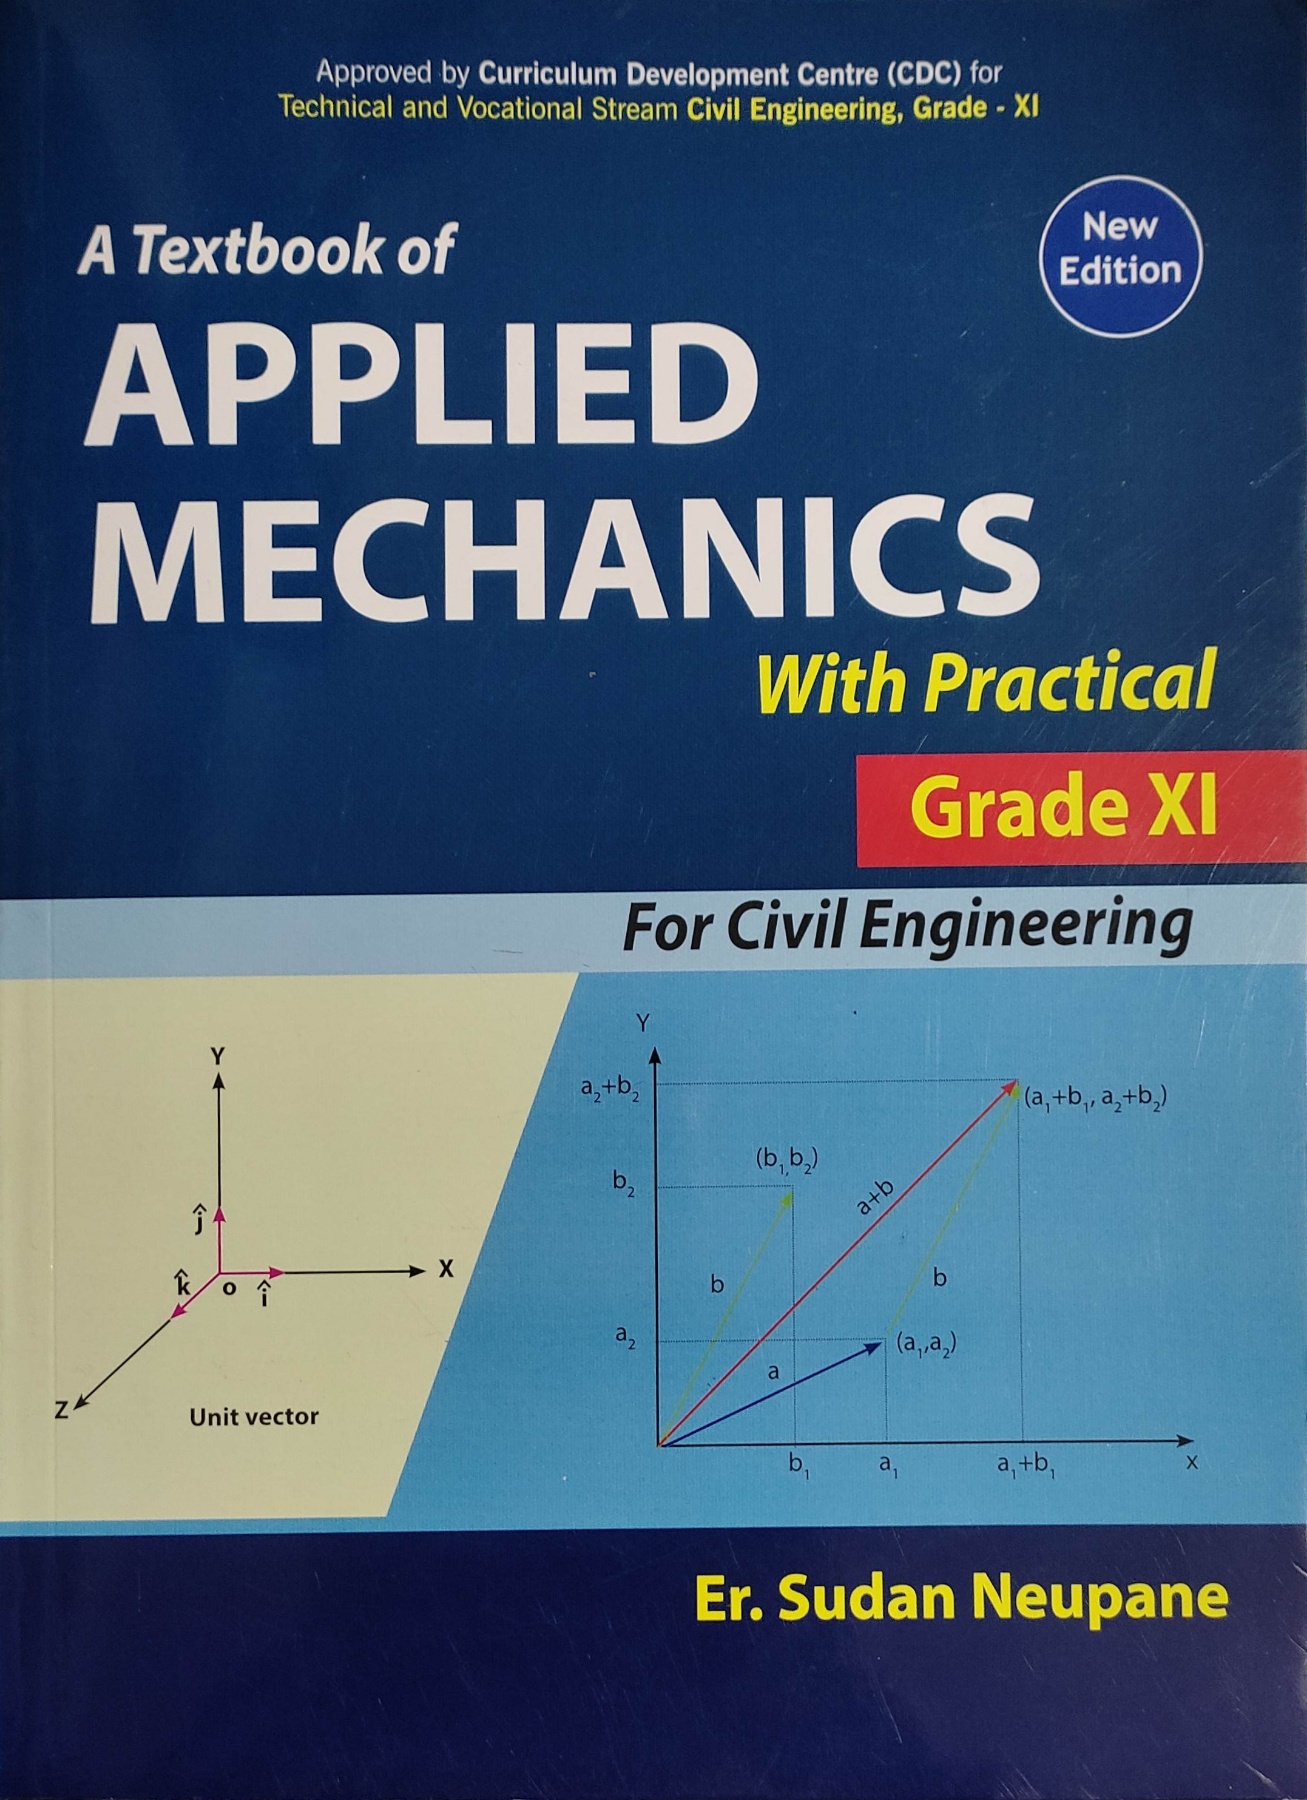 A Textbook of Applied Mechanics with Practical Grade XI For Civil Engineering